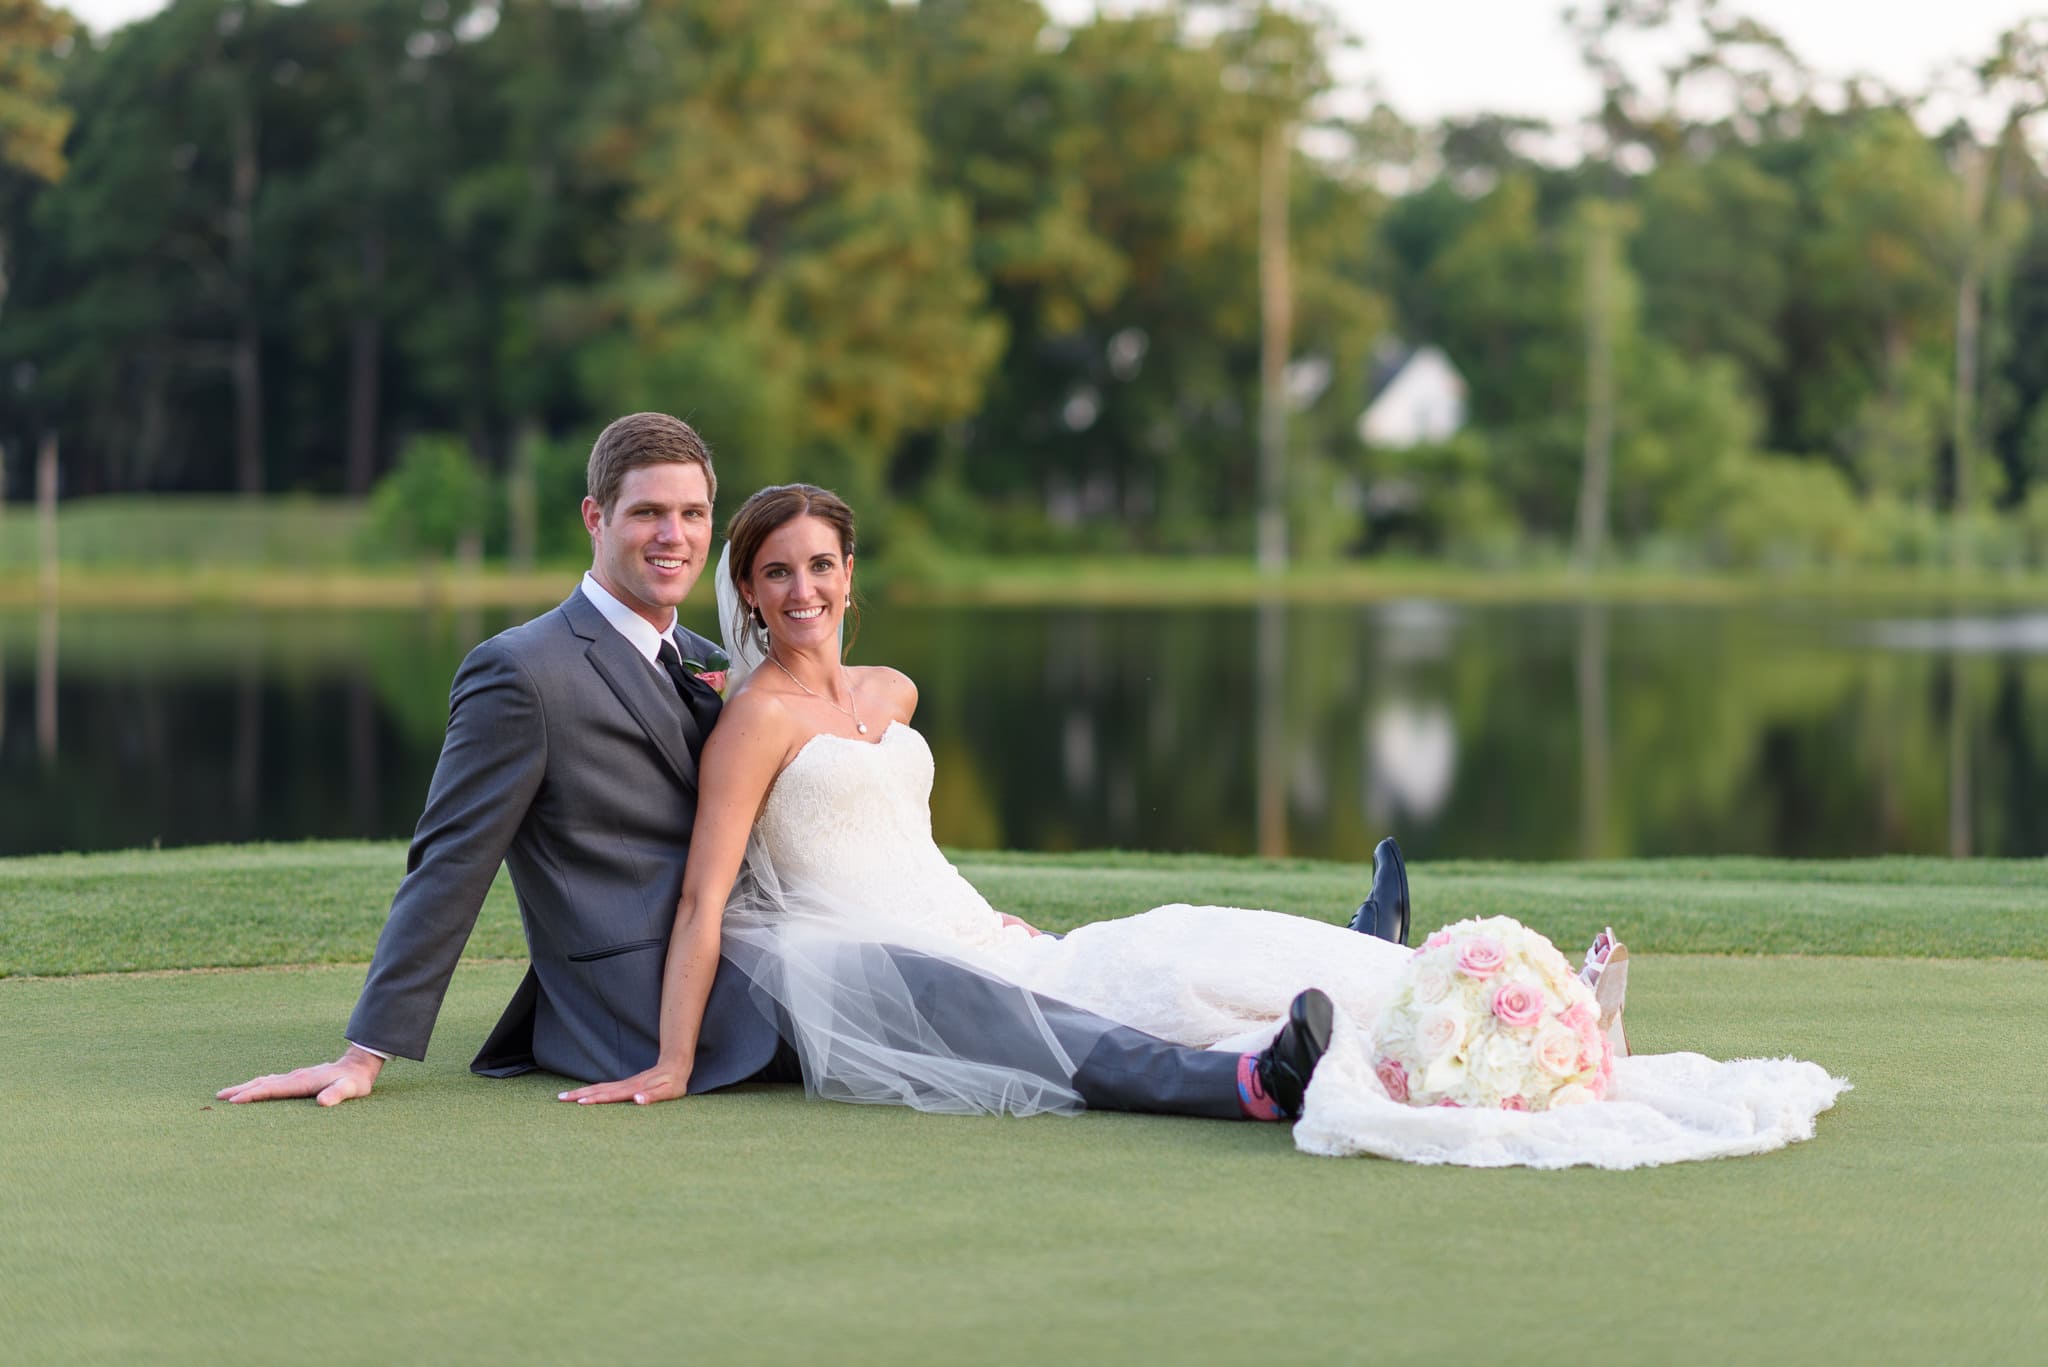 Bride laying with groom on greens - Pawleys Plantation